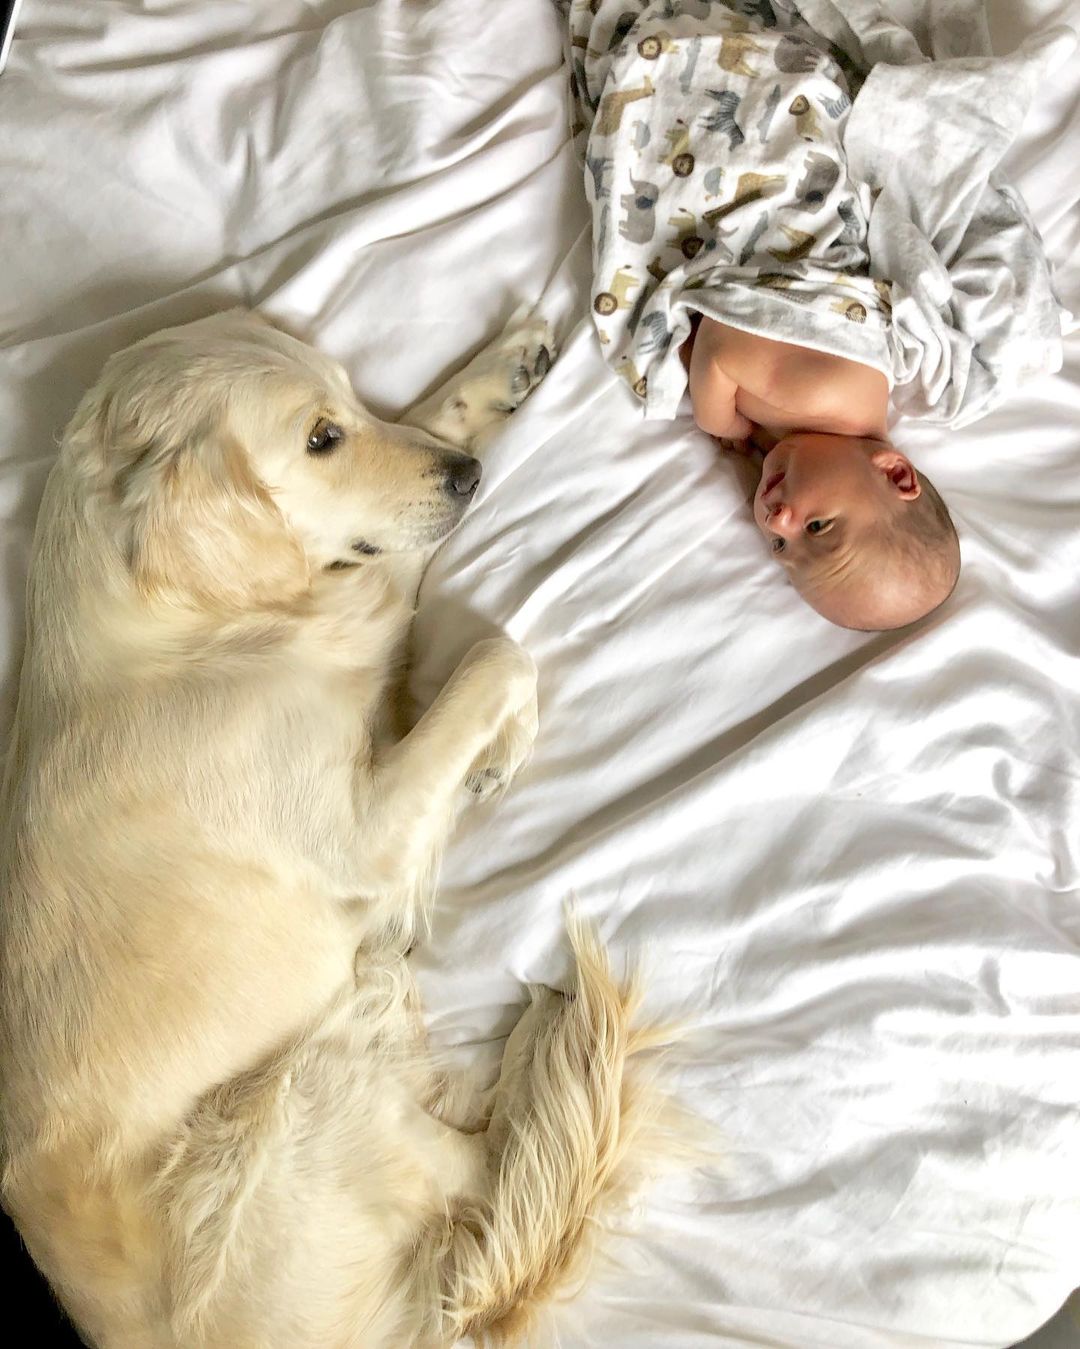 Golden Retriever laying next to baby